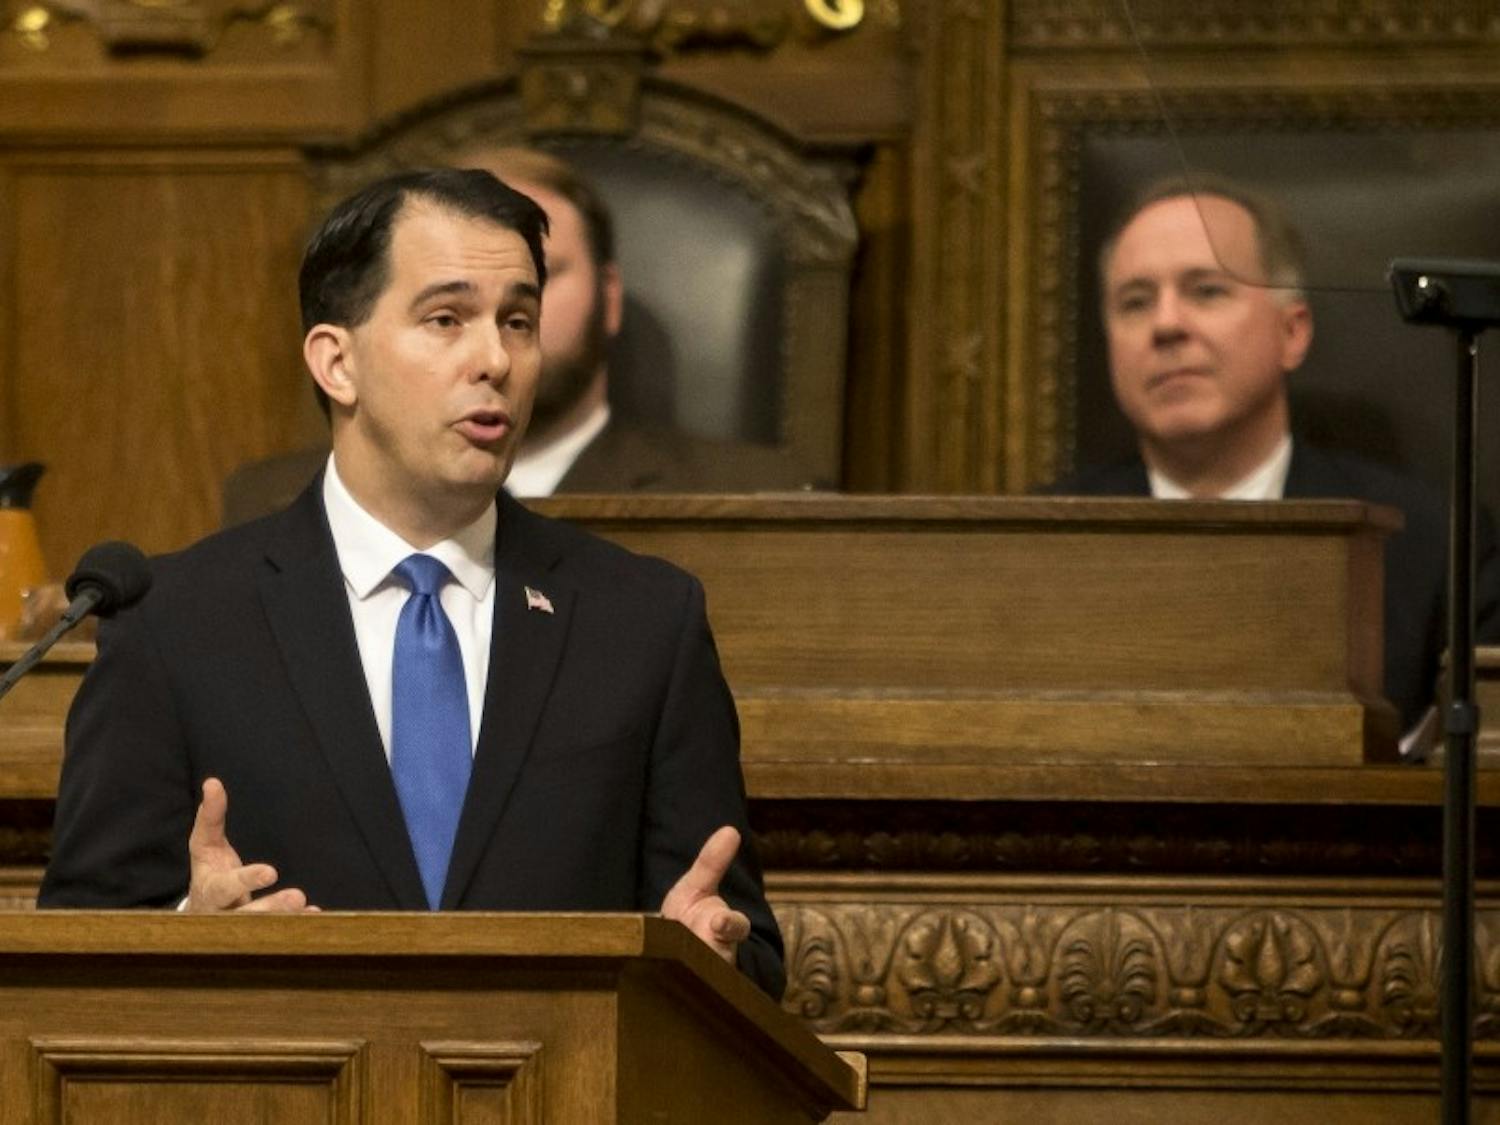 Gov. Scott Walker said he will cut tuition for in-state students at UW System schools.